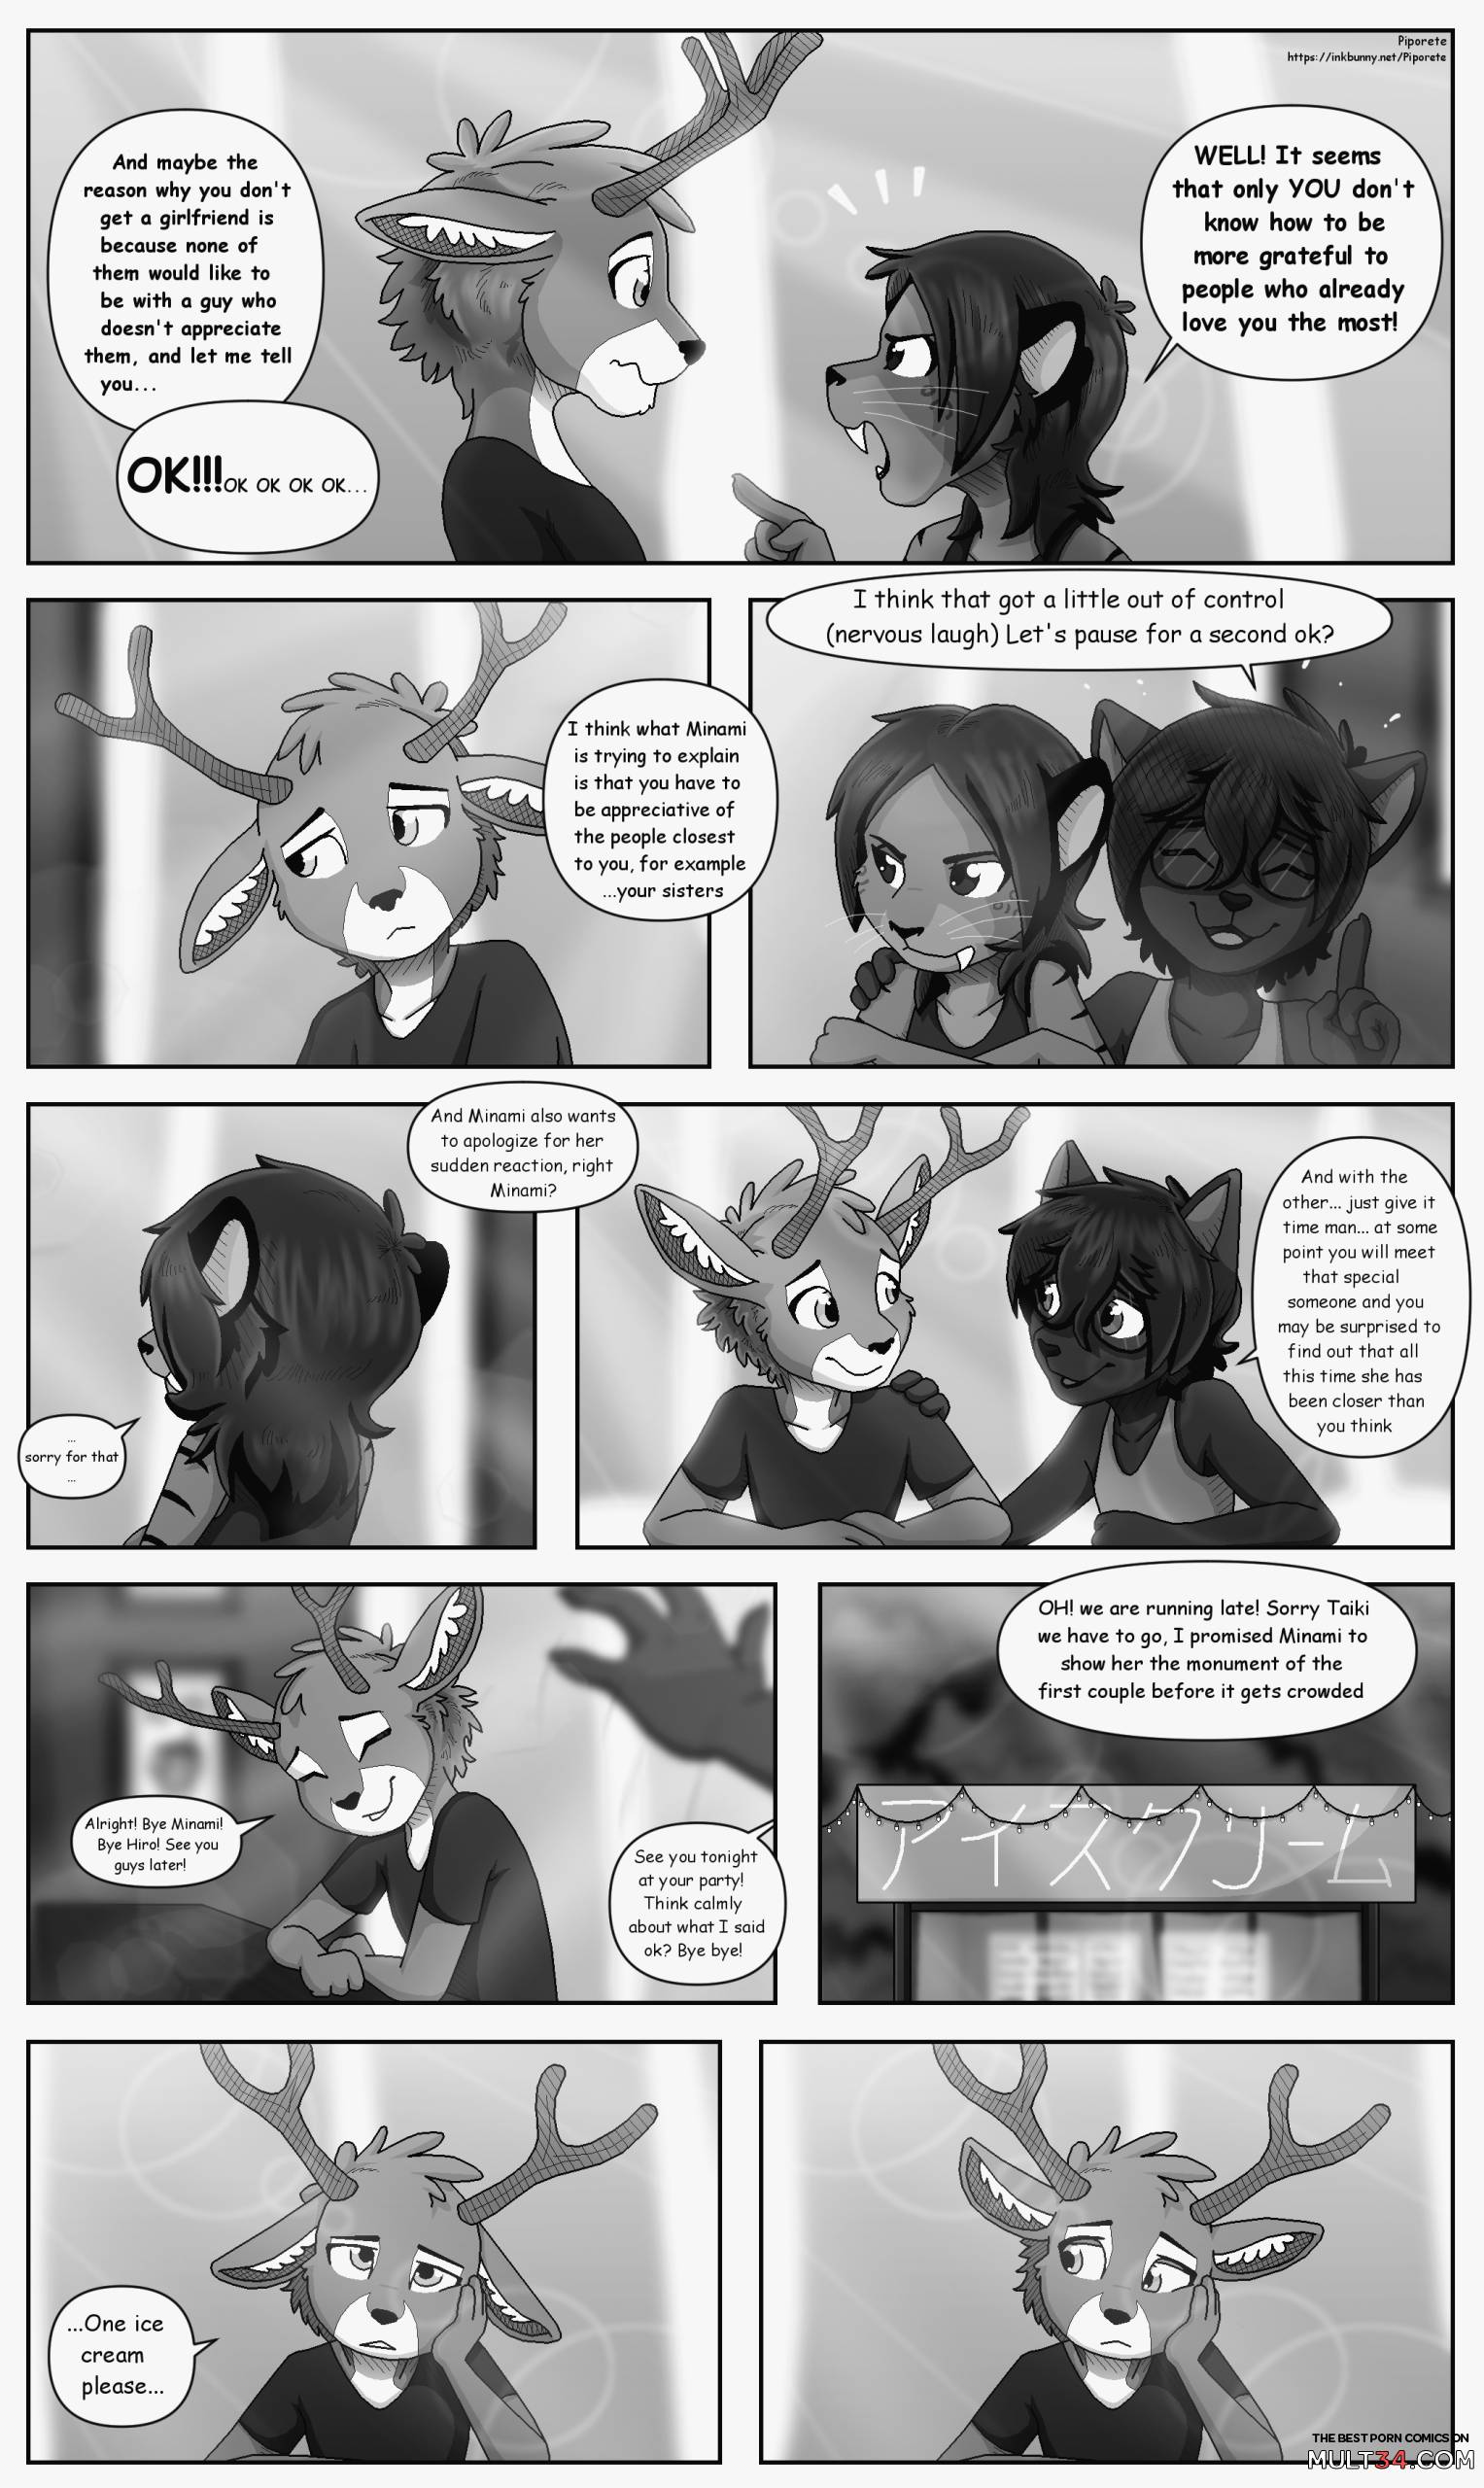 Keiko and Jin - Chapter 1 - 3 page 60